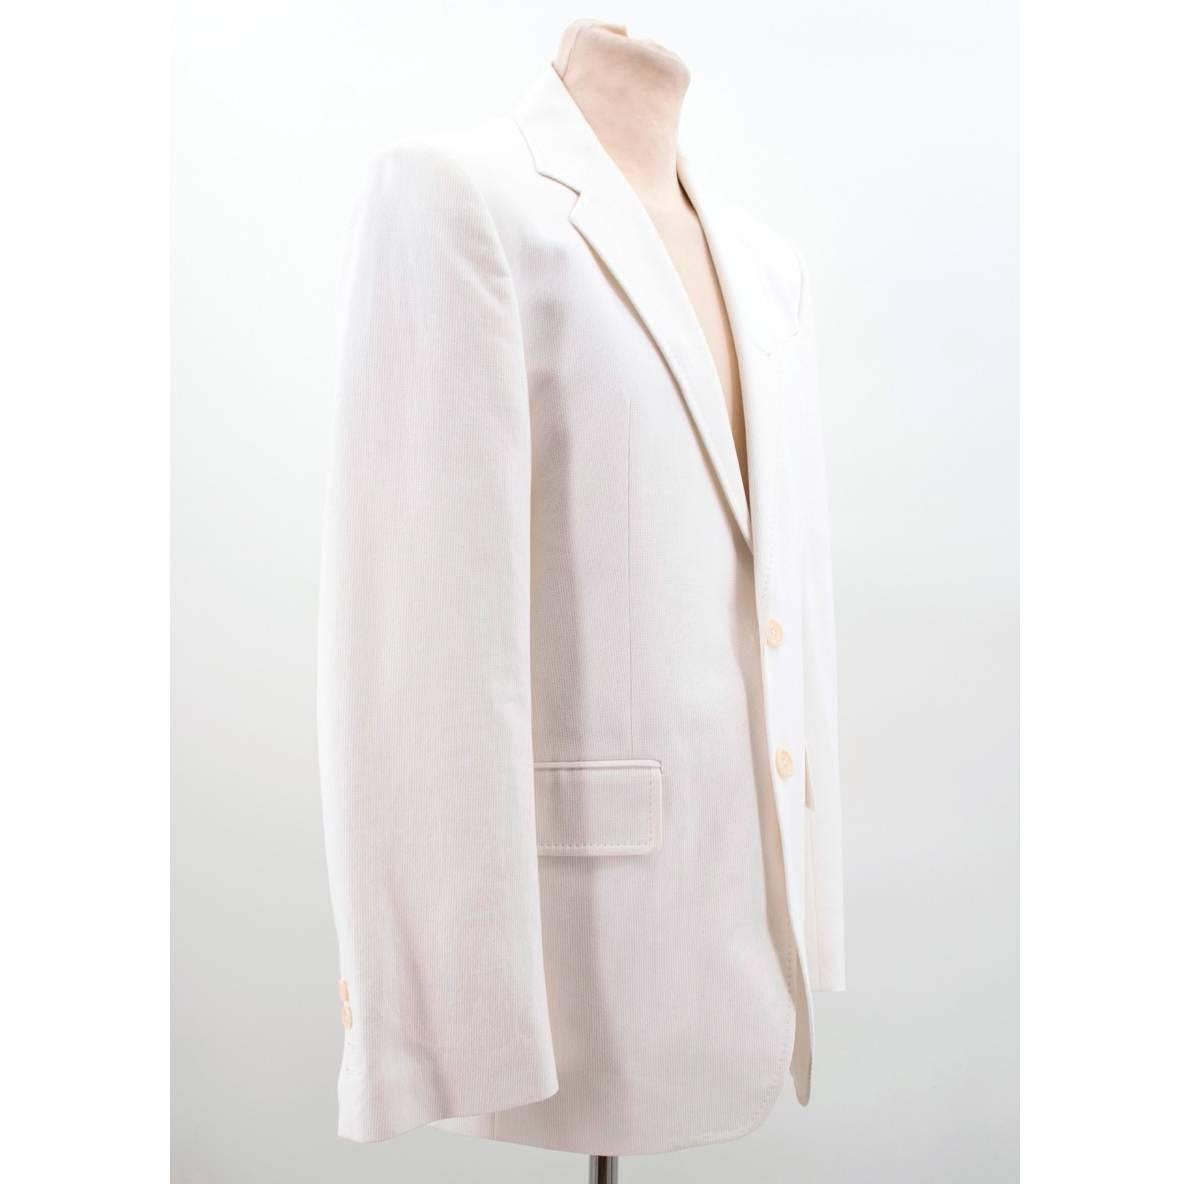 Ann Demeulemeester White Textured Suit In Excellent Condition For Sale In London, GB